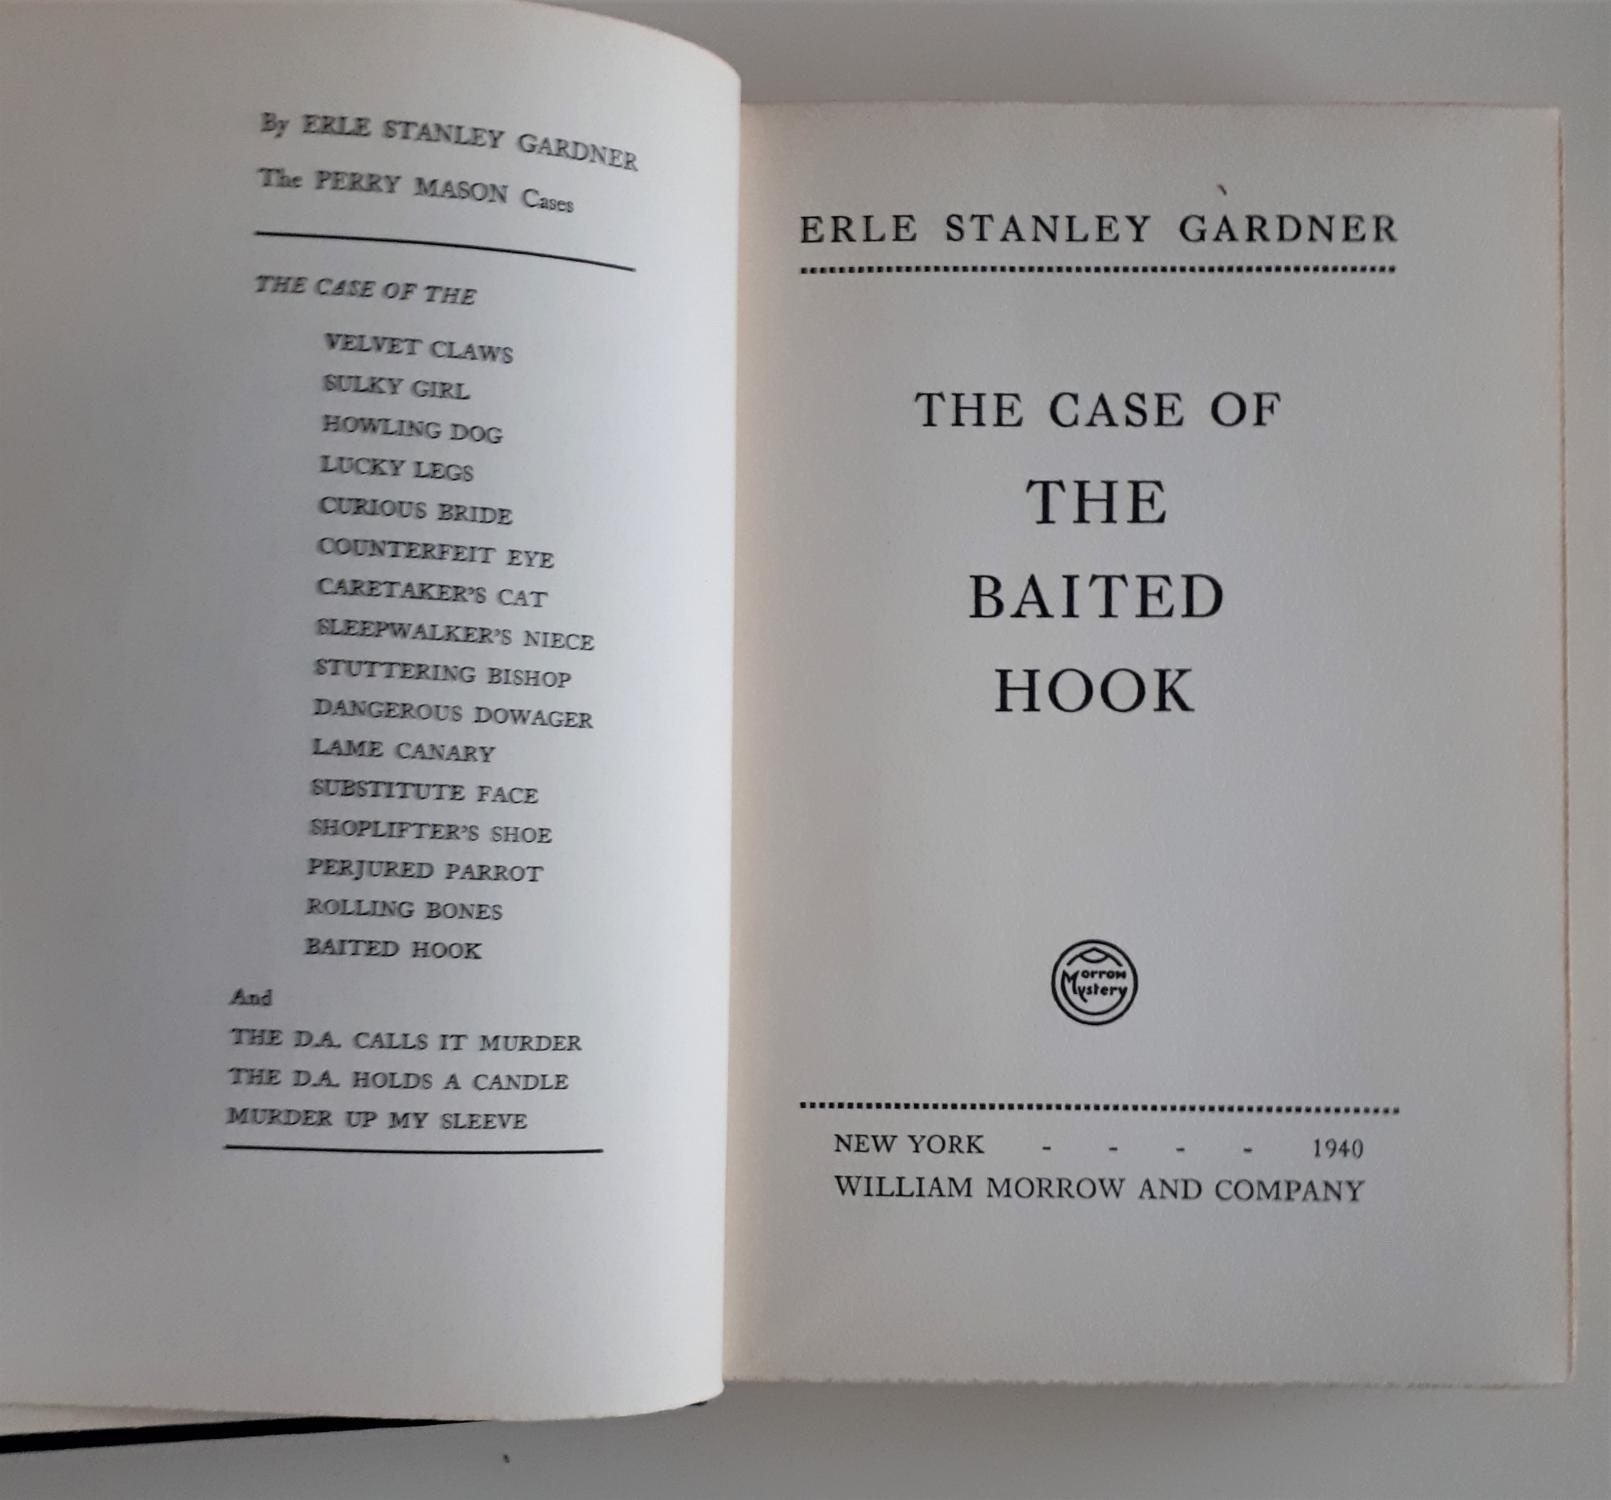 The case of the baited hook by Erle Stanley Gardner: Very Good Hardcover  (1940) 1st Edition